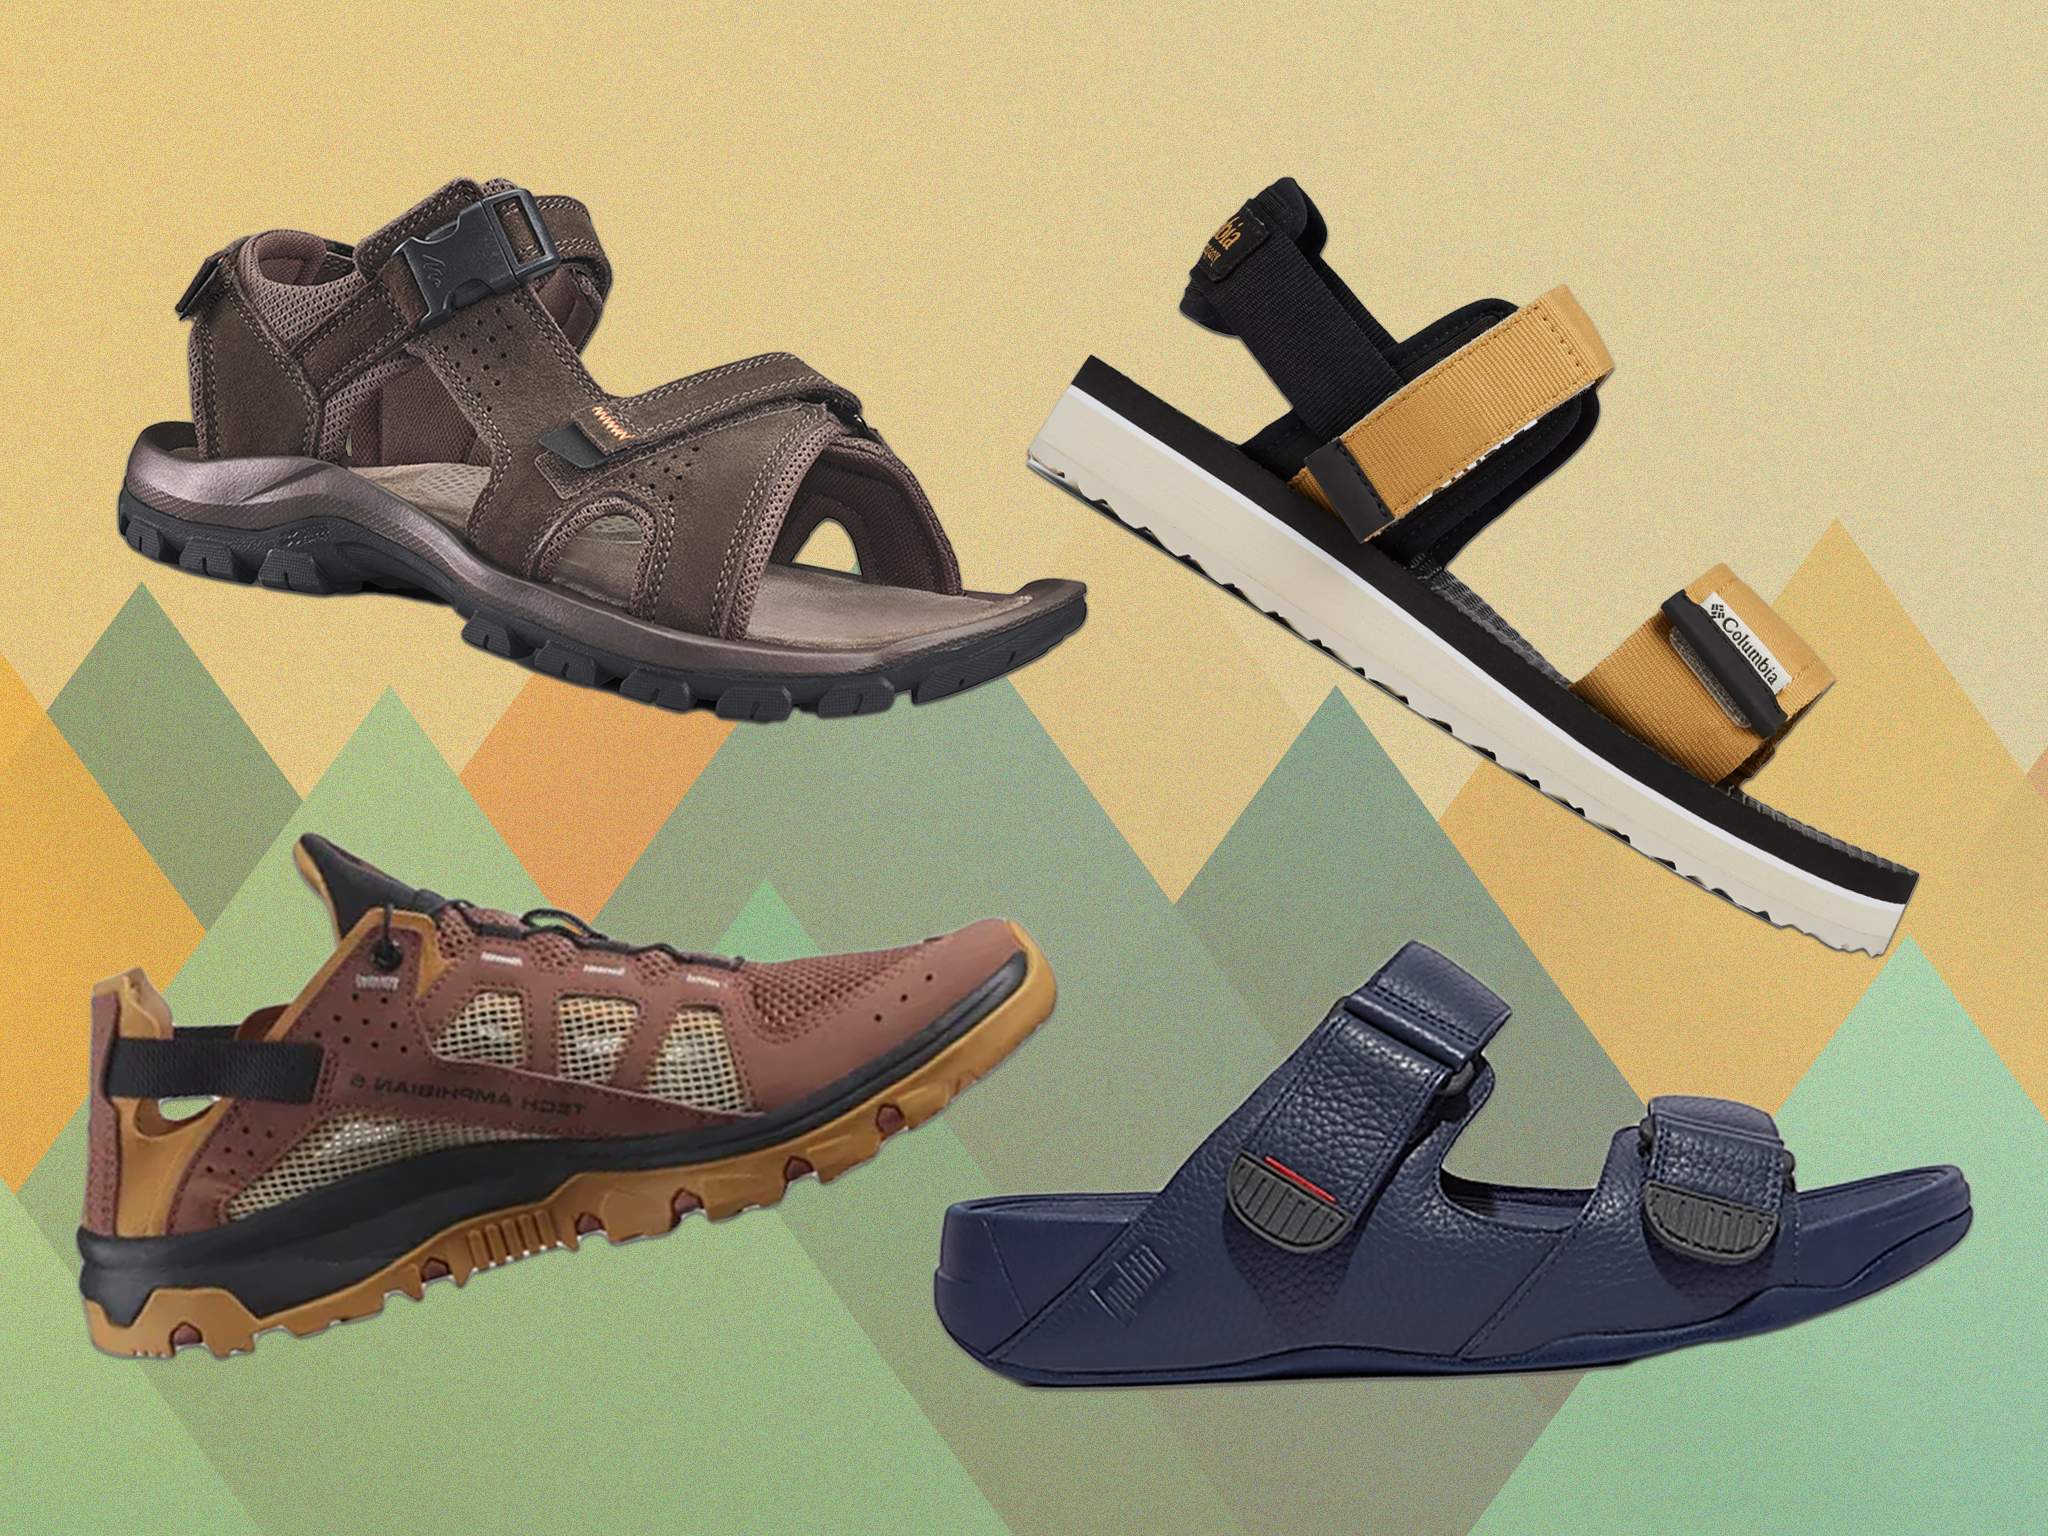 The best sandals for work and play in summer 2021